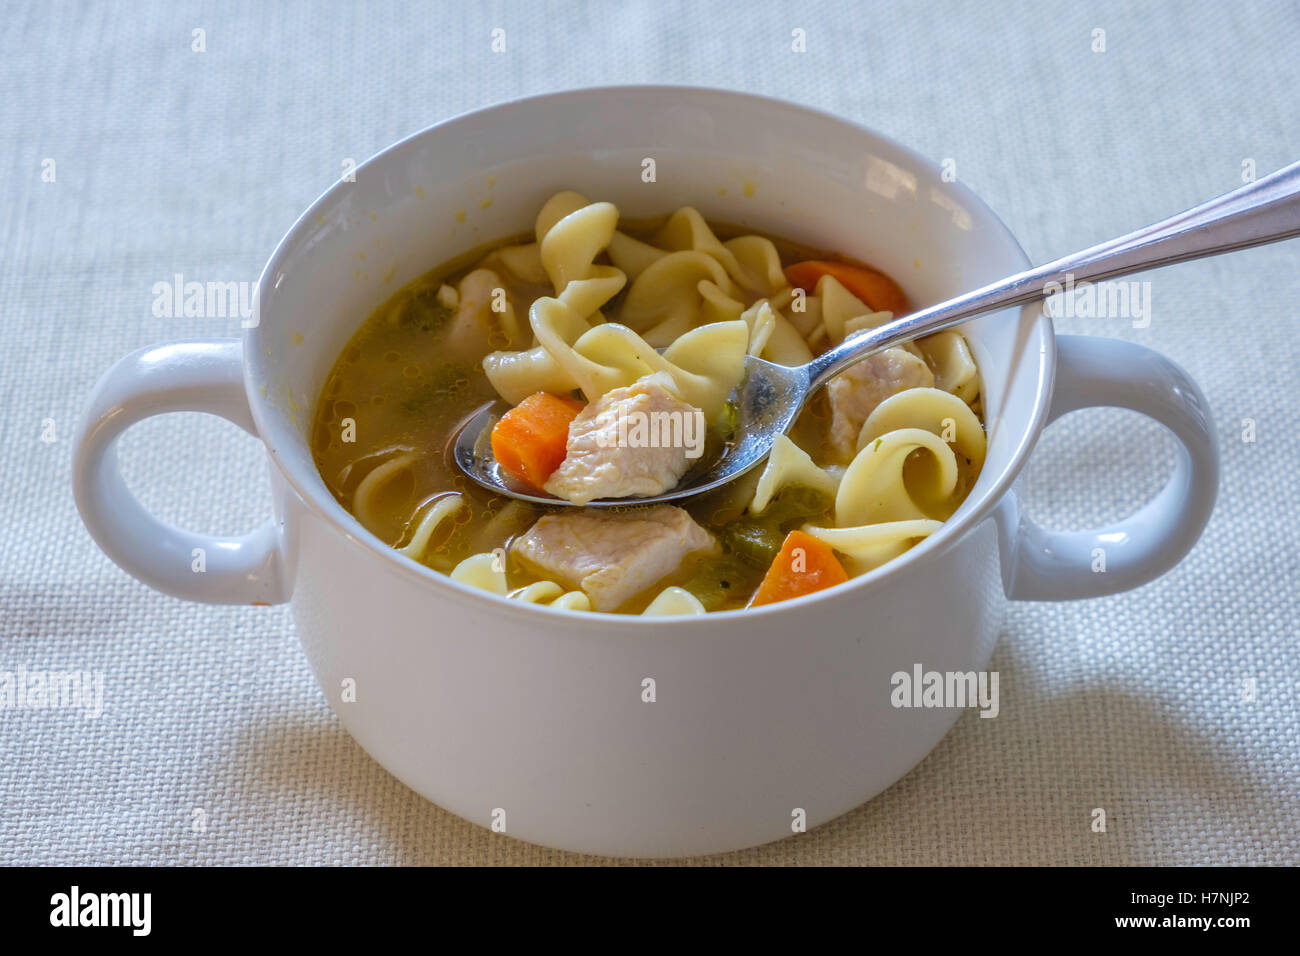 Home made chicken noodle soup, comfort food, containing carrots and celery served in a white bowl. Closeup. Stock Photo